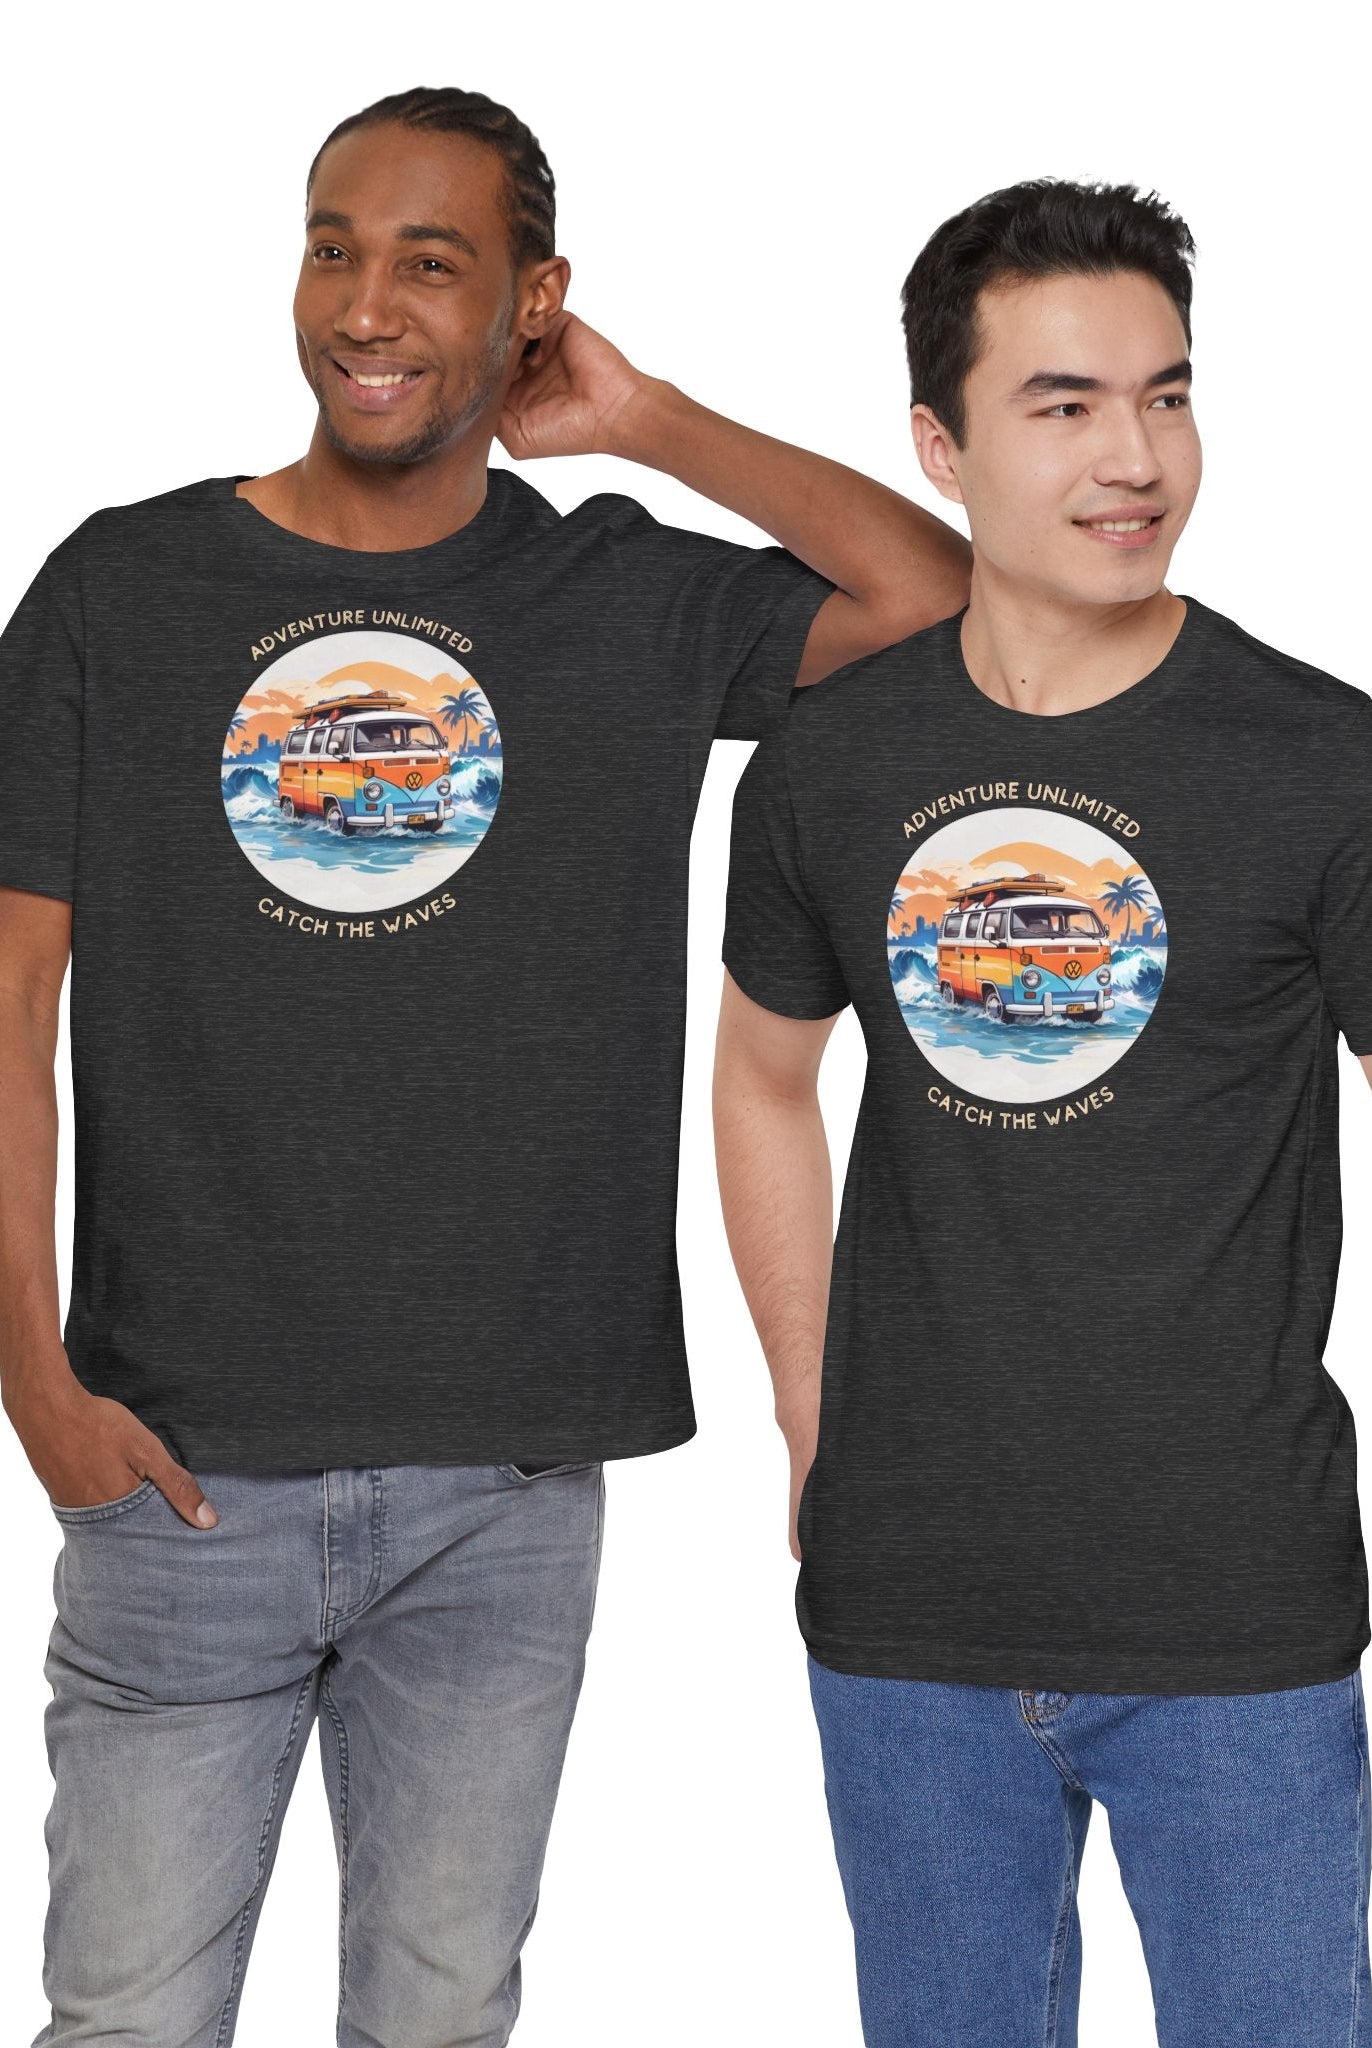 Adventure Unlimited - Surfing T-Shirt with ’the best day ever’ printed on two men’s t-shirts